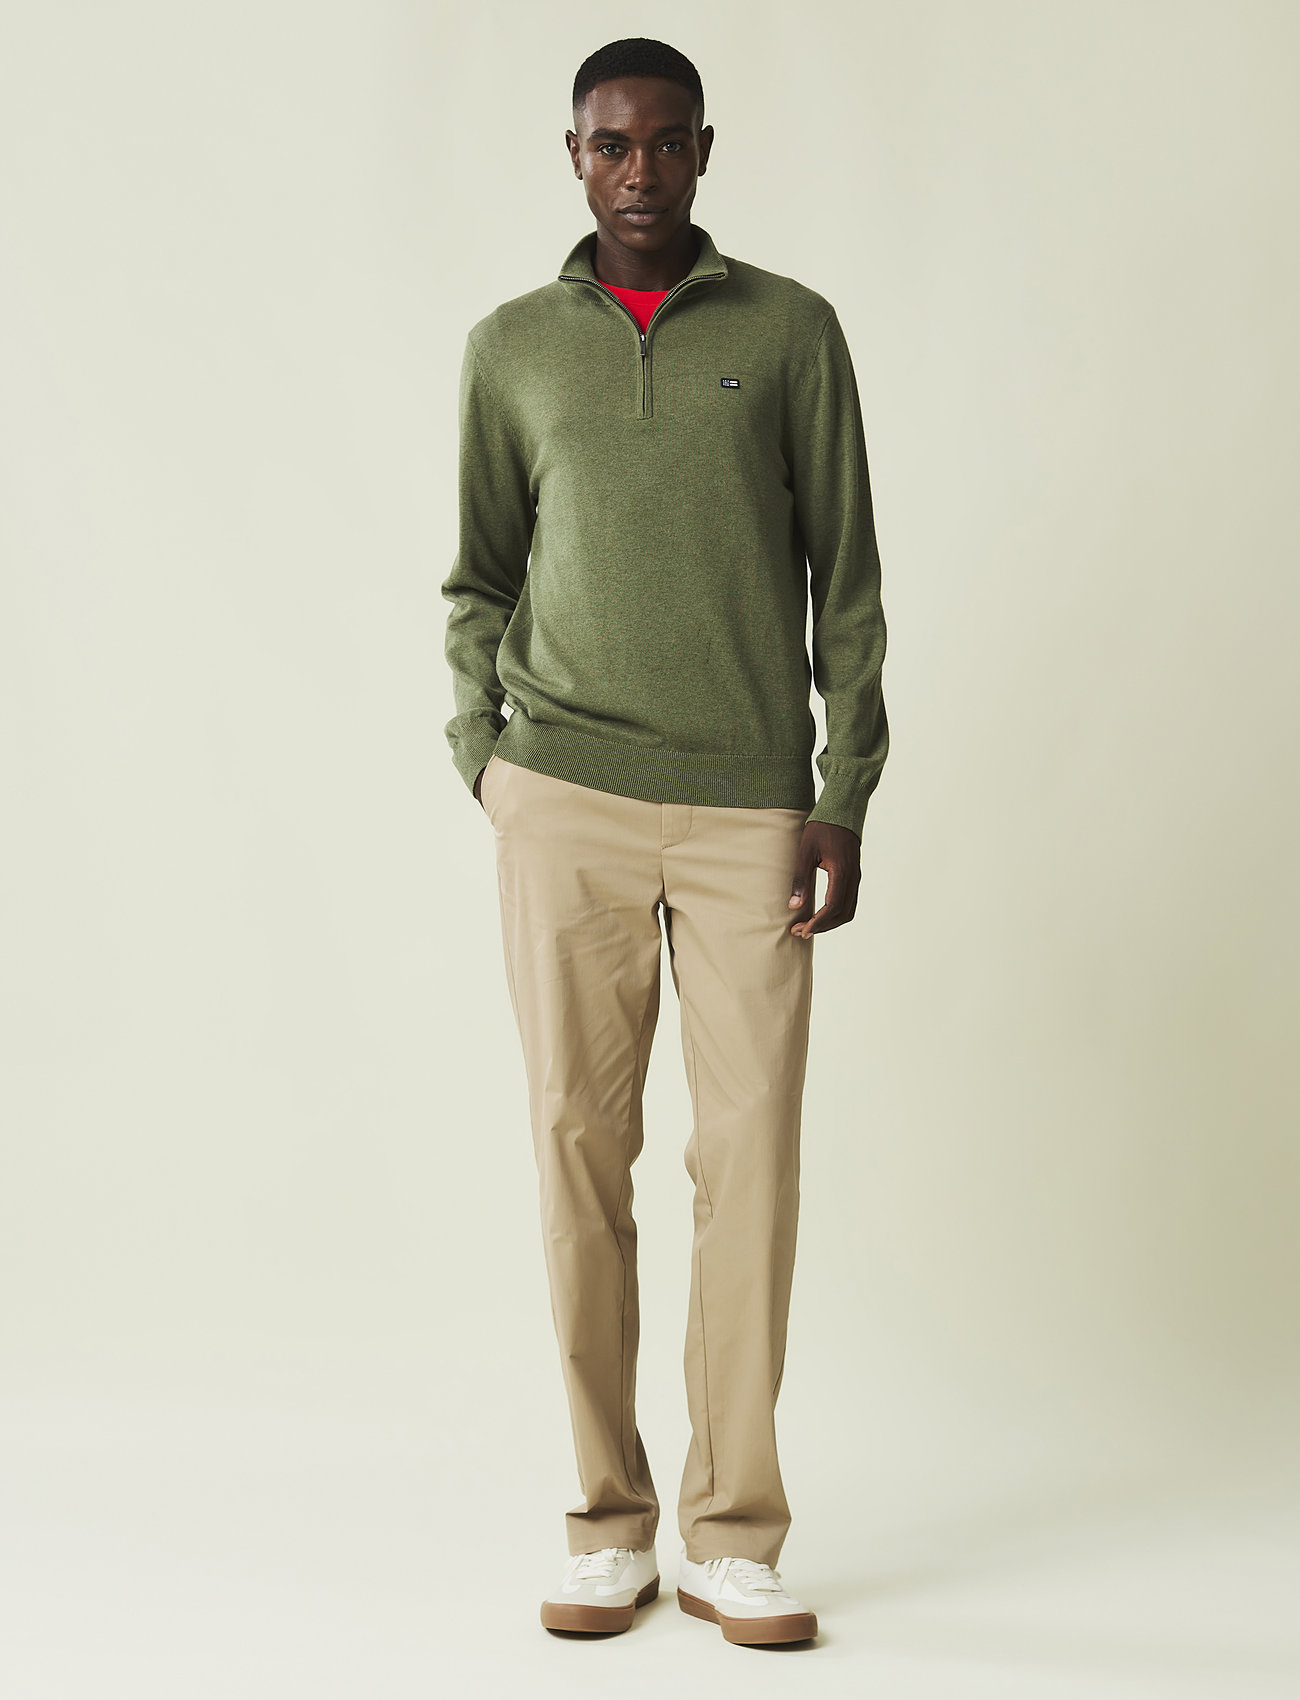 Lexington Clothing - Clay Cotton Half-Zip Sweater - mehed - green - 1